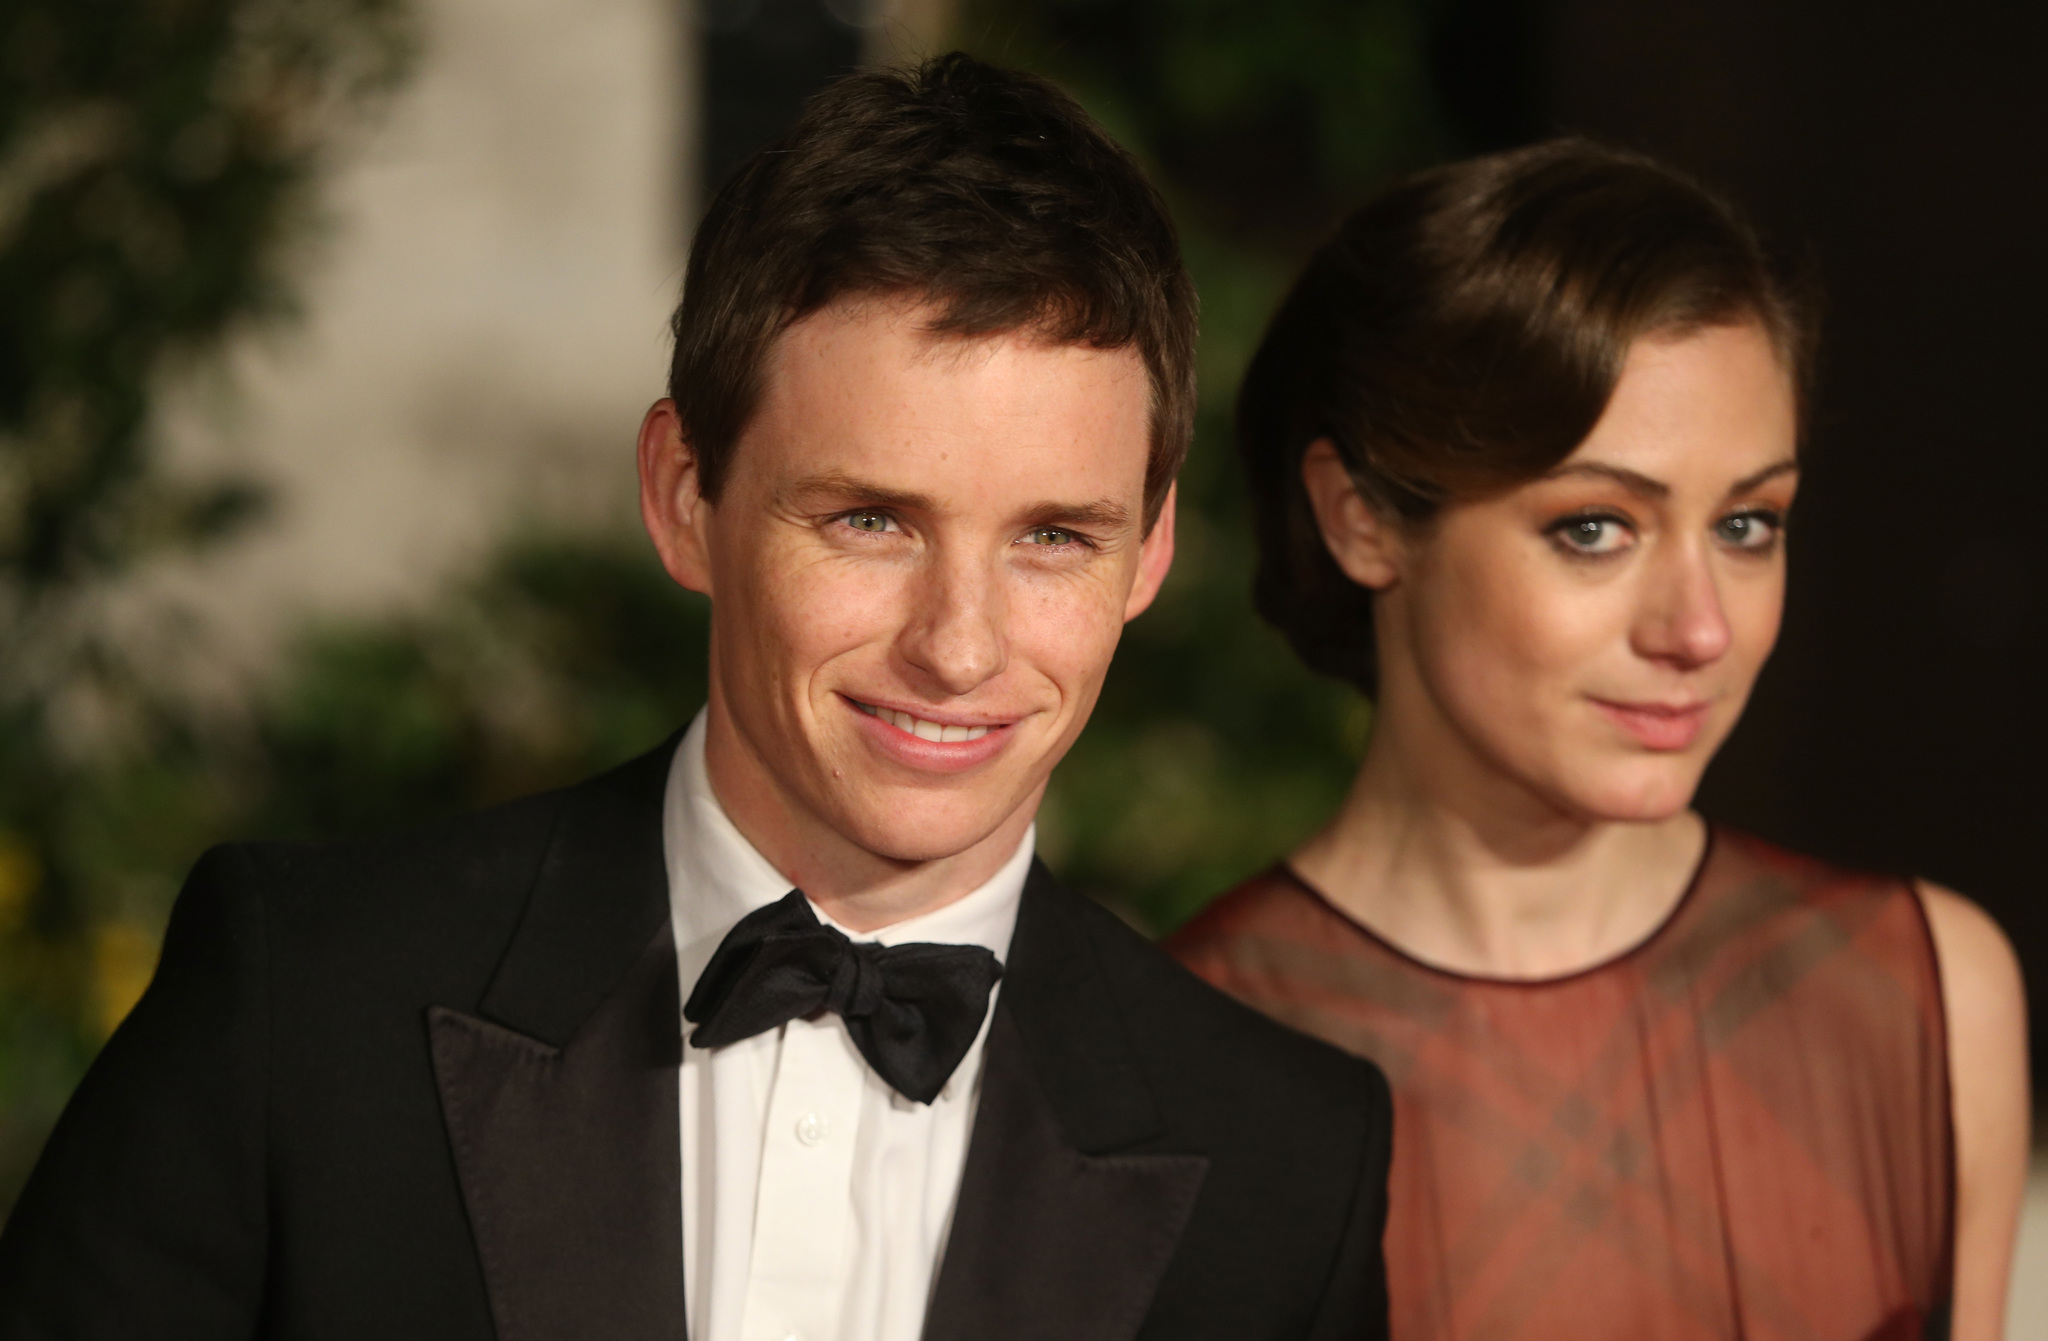 Eddie Redmayne and Hannah Bagshawe arrive for an official dinner party after the EE British Academy Film Awards at The Grosvenor House Hotel on February 16, 2014 in London, England.